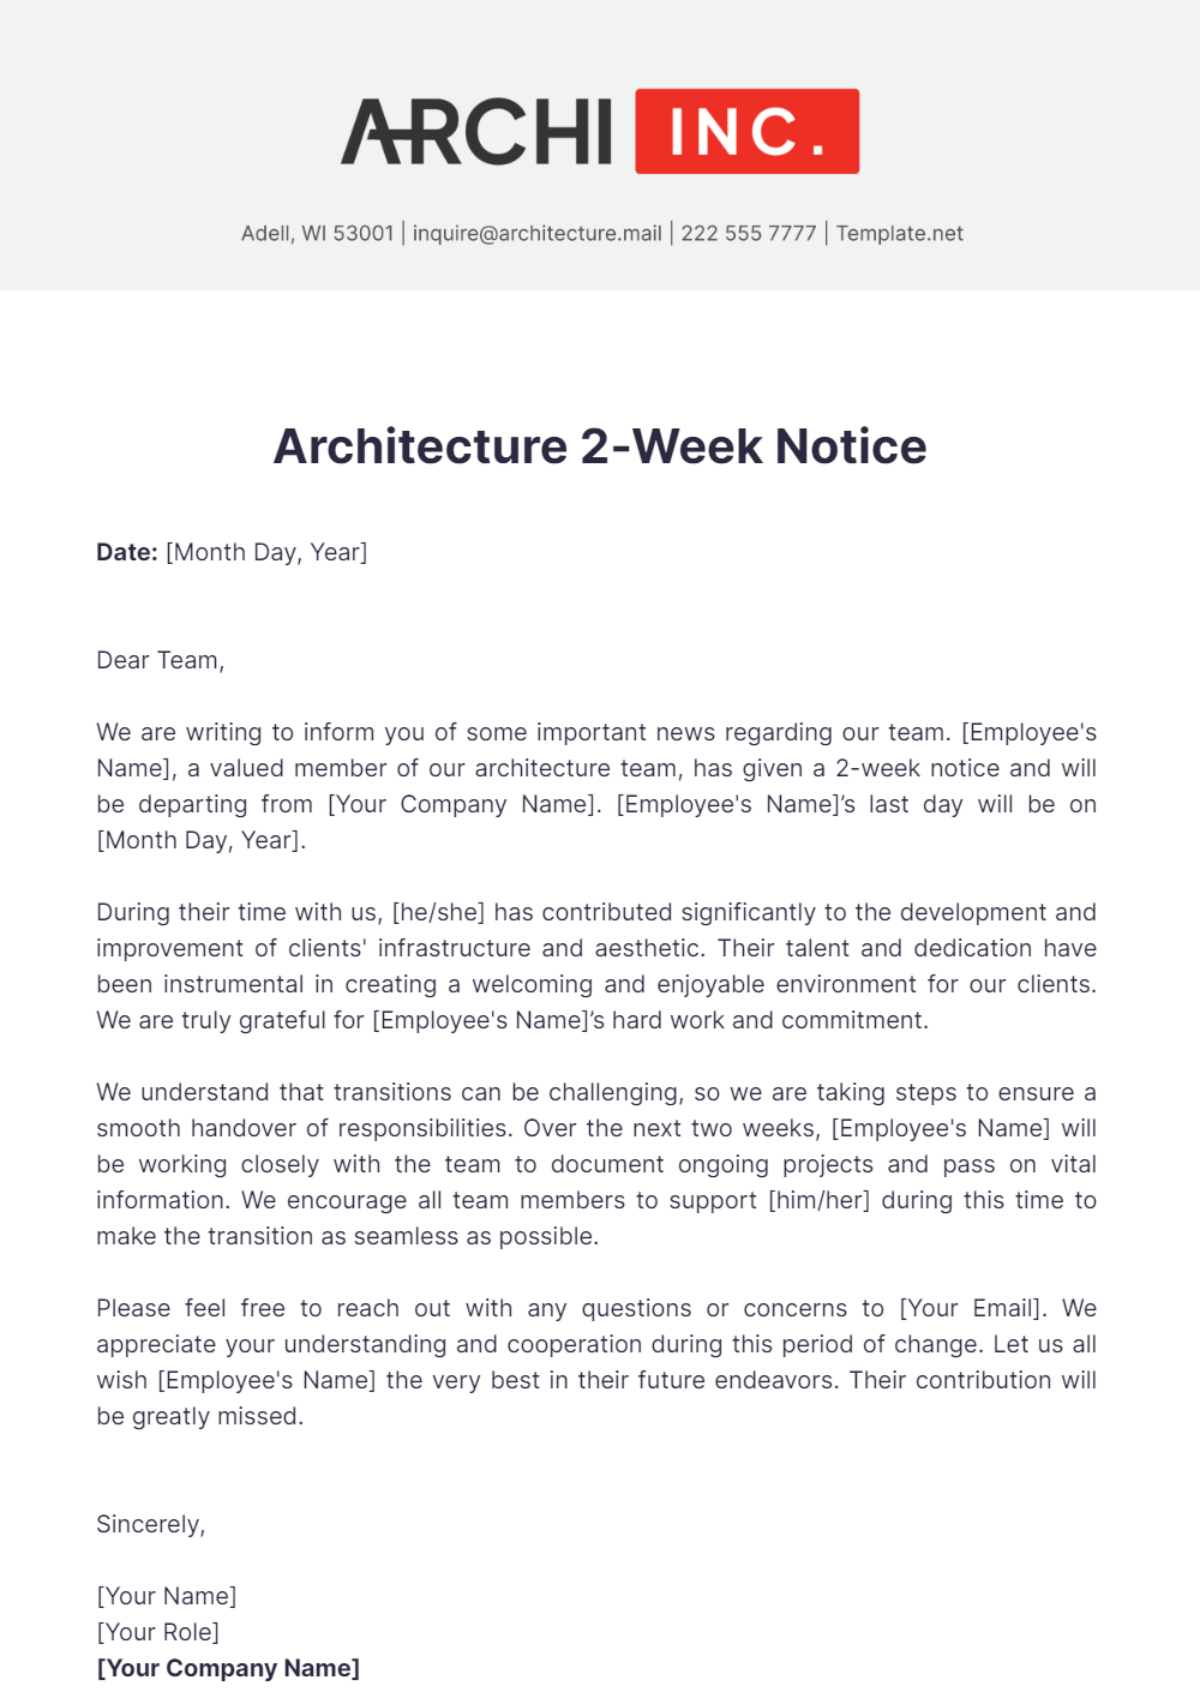 Free Architecture 2-Week Notice Template